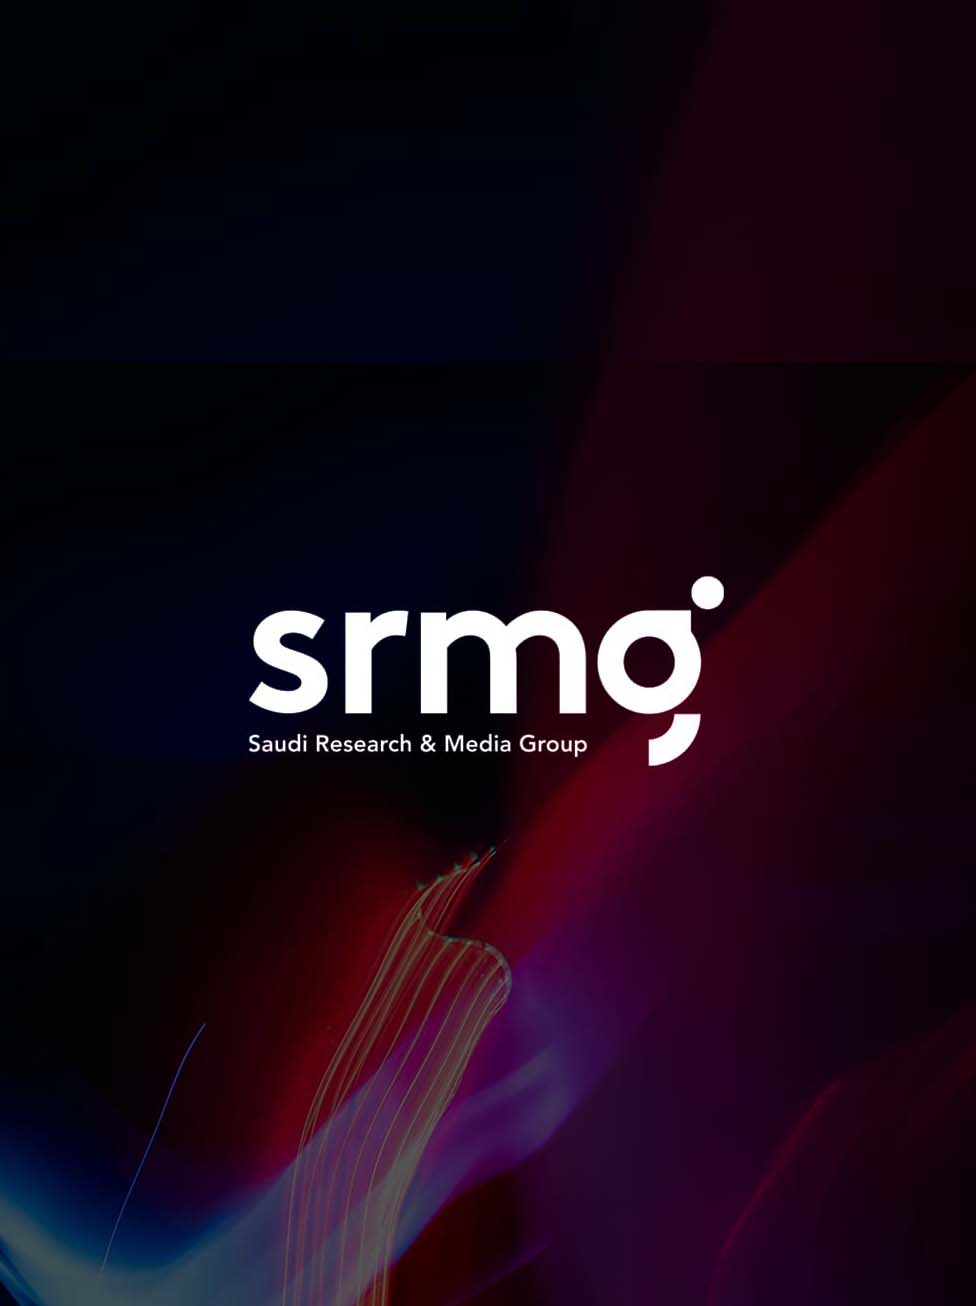 SRMG new brand and strategy launched